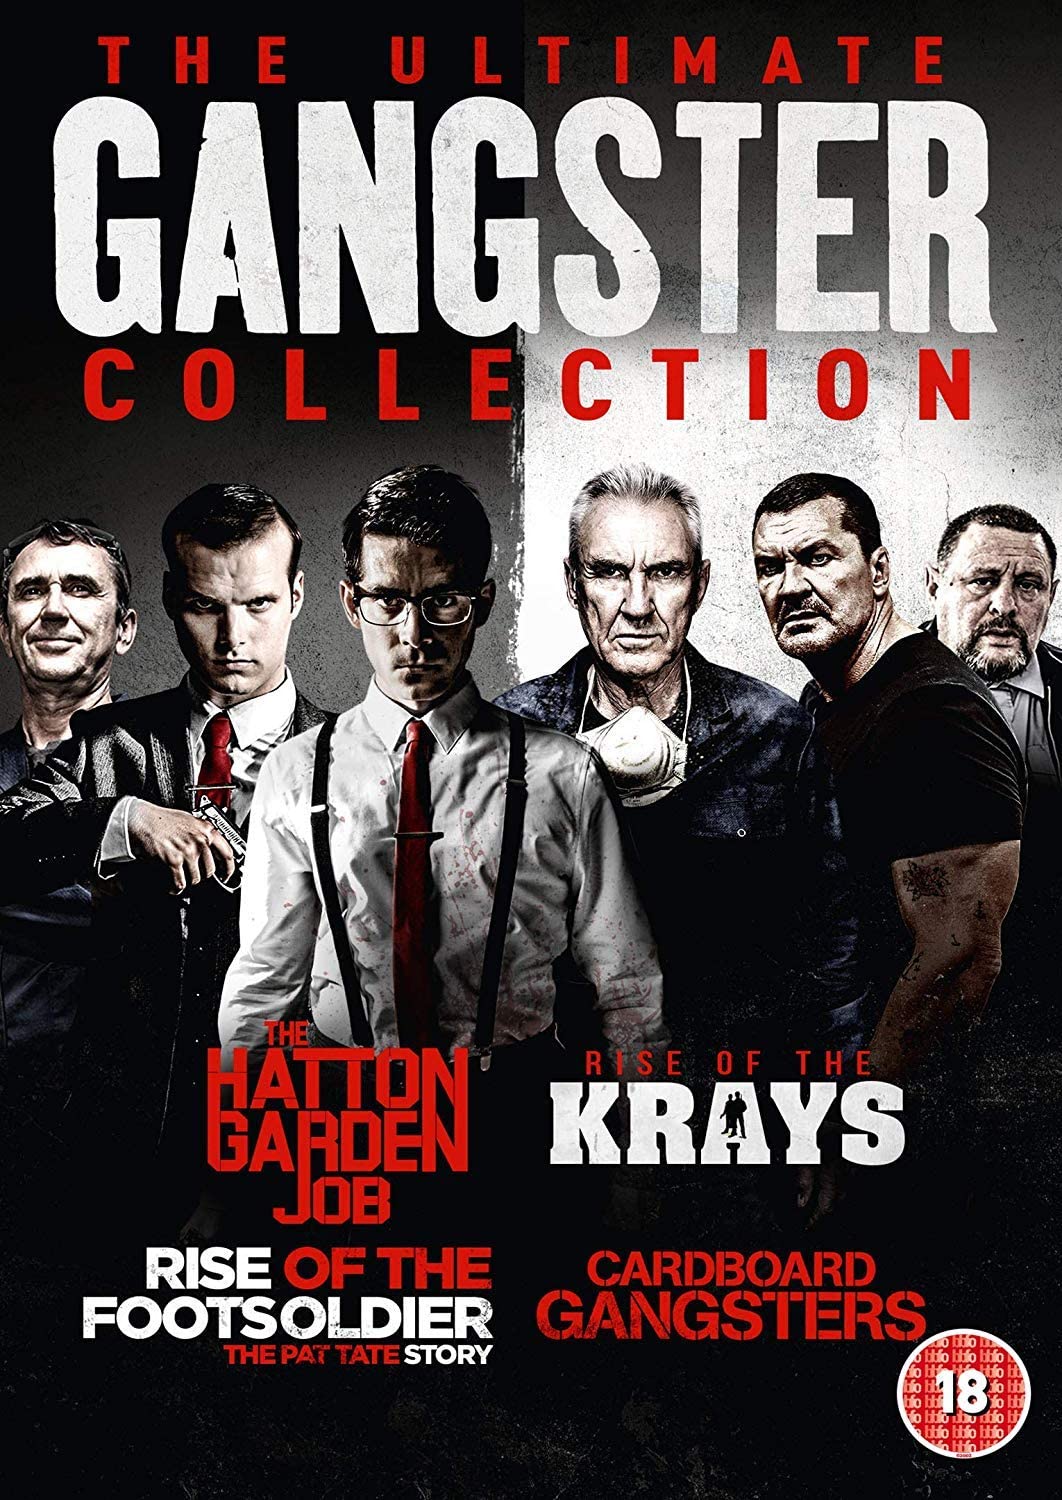 The Ultimate Gangster Collection - Documentary [DVD]